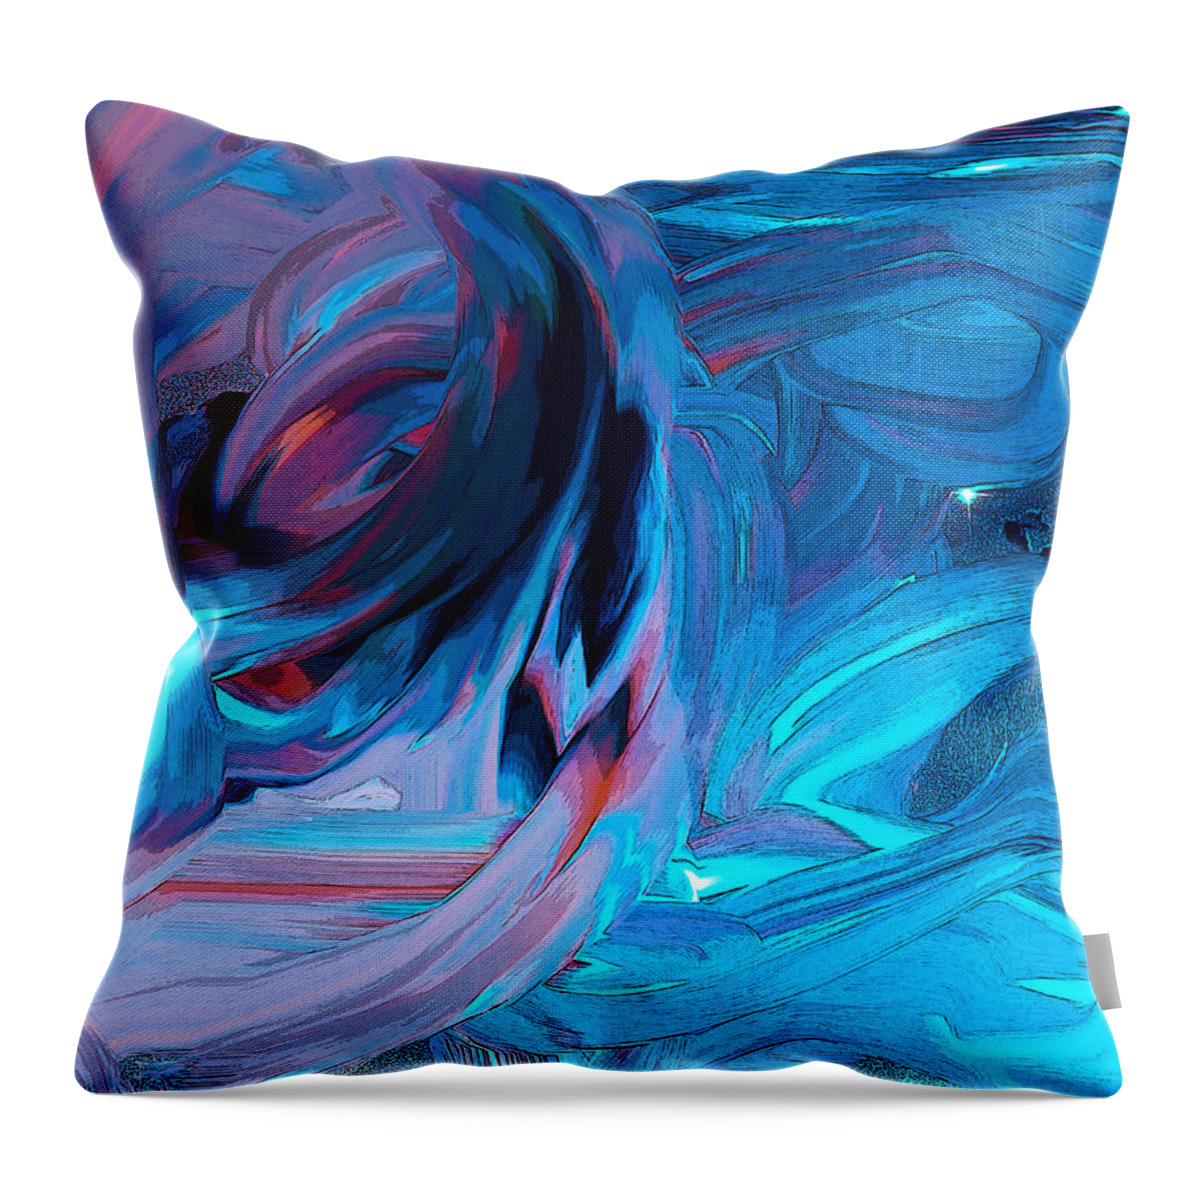  Original Contemporary Throw Pillow featuring the digital art Entrance to the Blues by Phillip Mossbarger